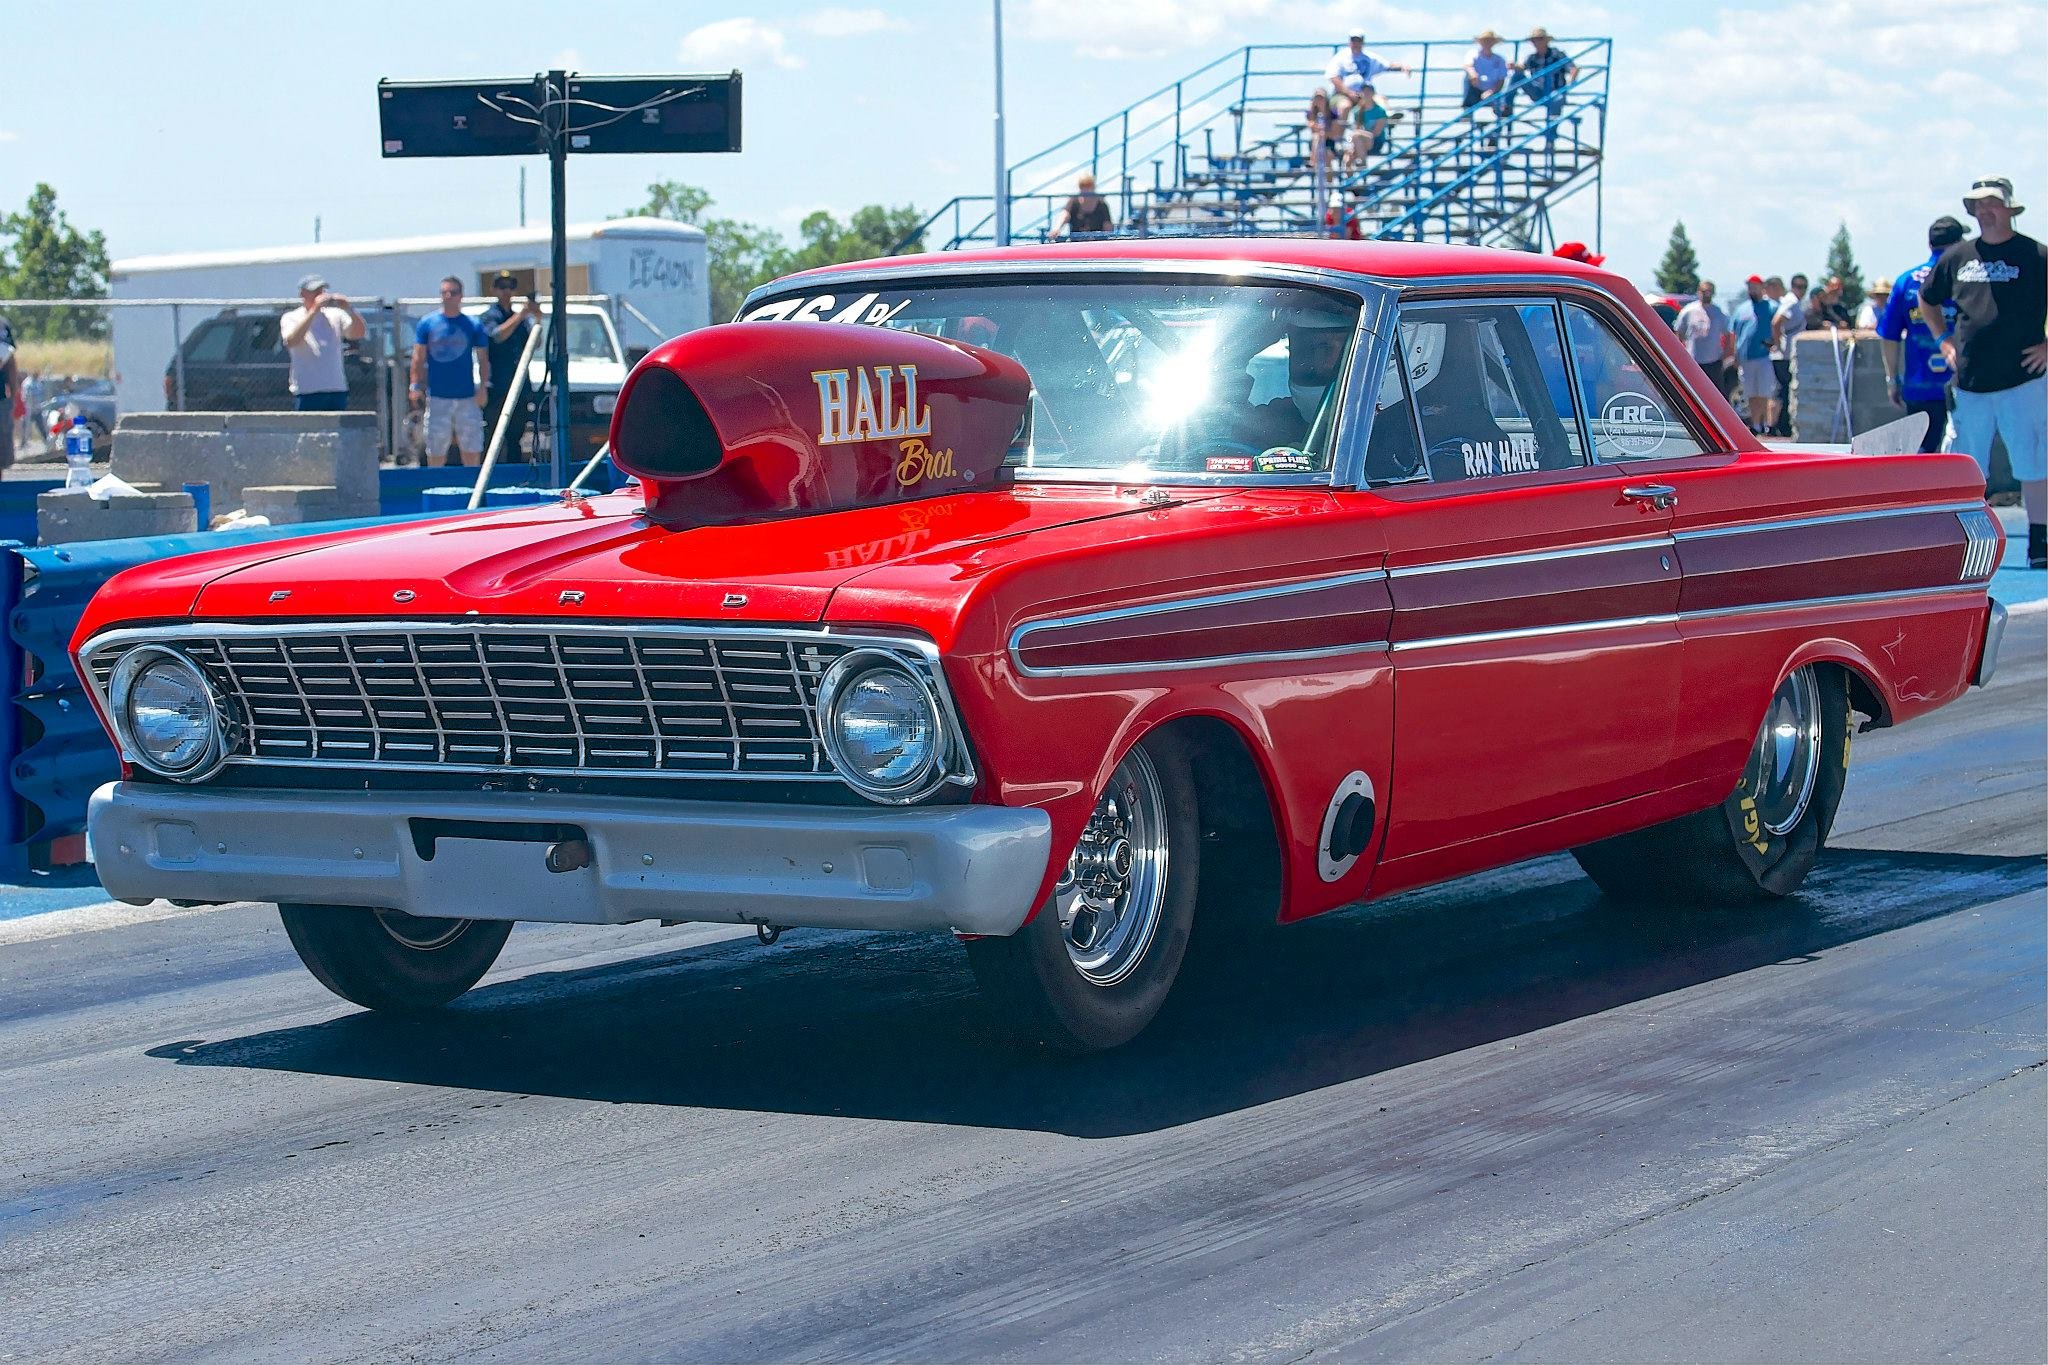 drag, Racing, Hot, Rod, Rods, Race, Muscle, Ford, Falcon Wallpaper